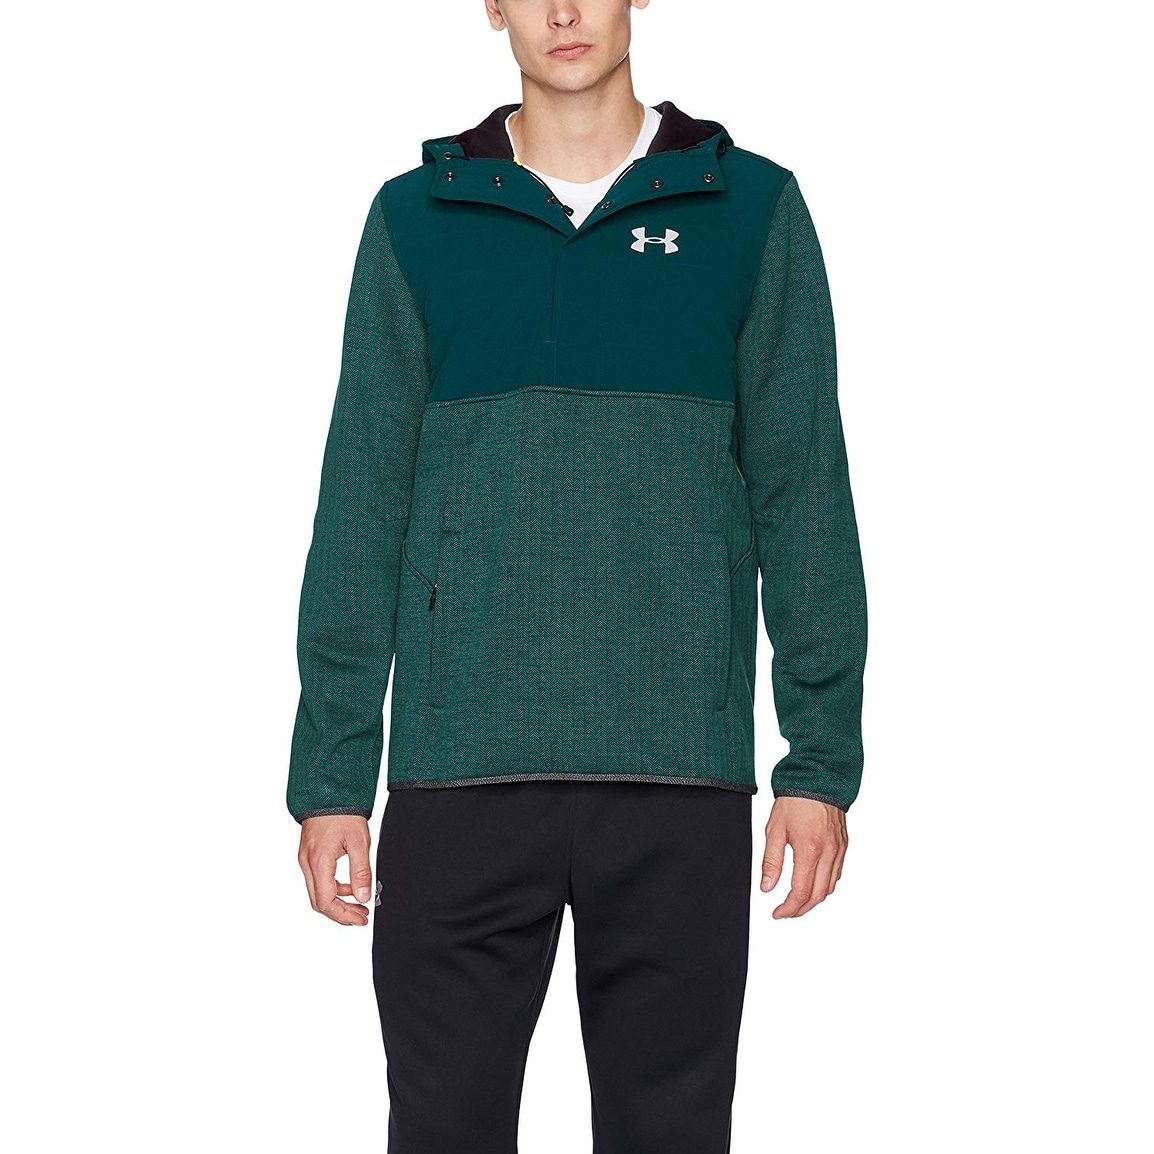 under armour jackets green